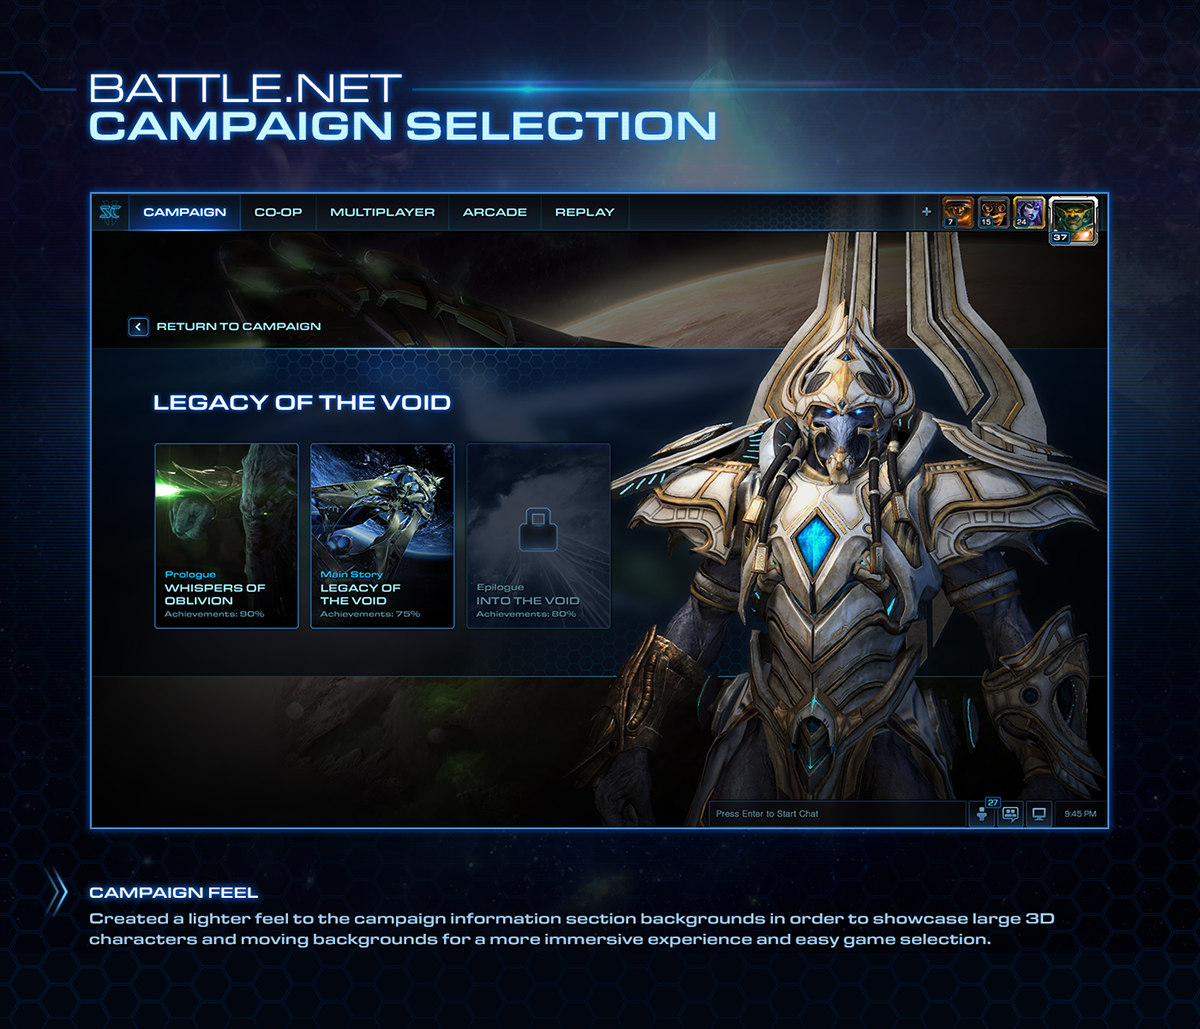 Voices of the void console. STARCRAFT 2 Legacy of the Void обложка. Диск старкрафт 2 Legacy of the Void. STARCRAFT 2 Legacy of the Void источники миазмов. STARCRAFT II (2): Legacy of the Void.